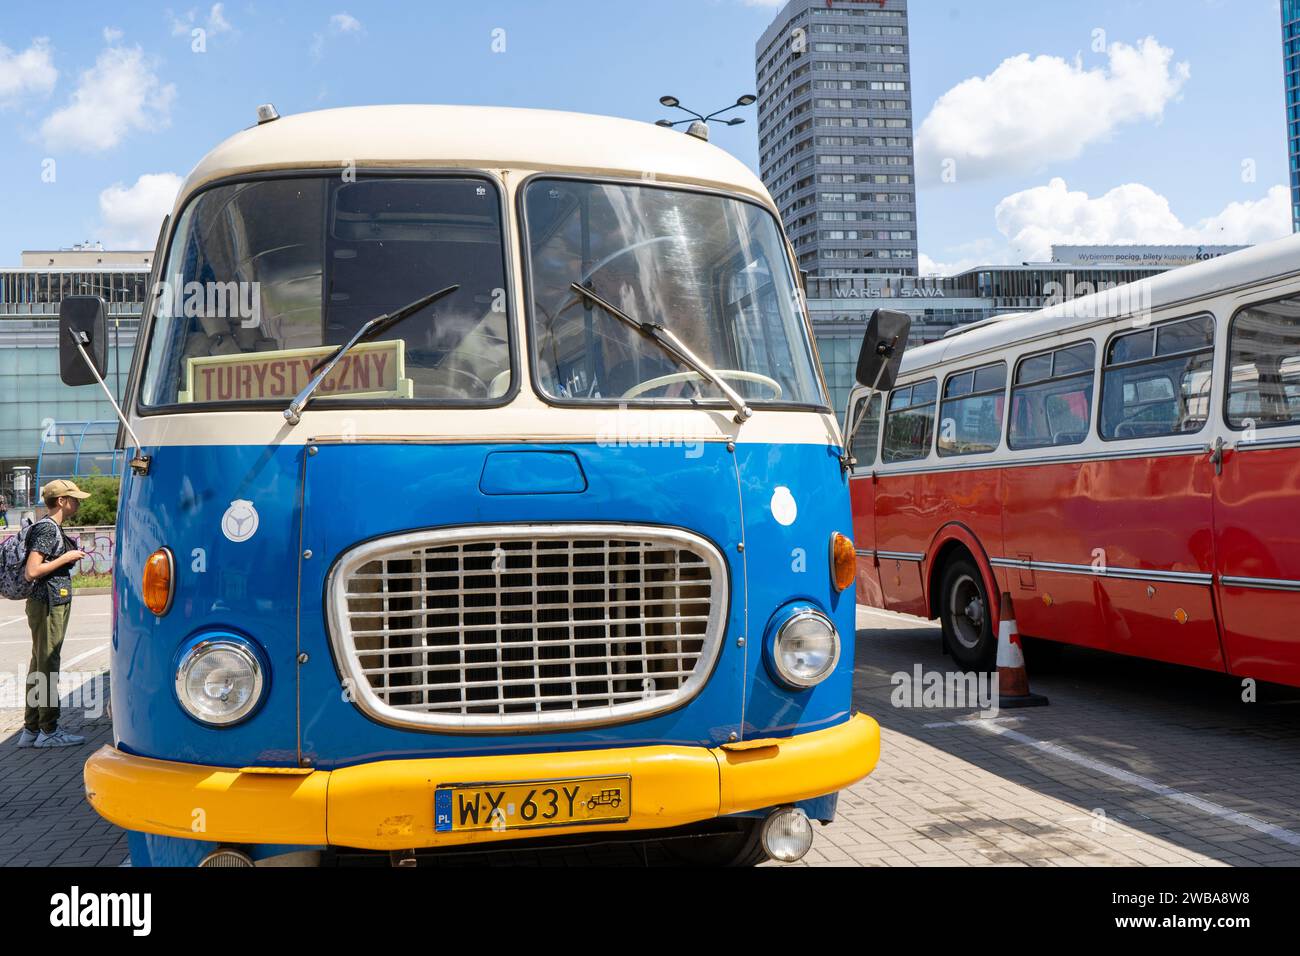 The old red and blue Skoda bus. Czechoslovakian Skoda RTO 706 Karosa model. Tourist buses vintage model. The street of the old city is a tourist attraction. Poland, Warsaw - July 27, 2023. Stock Photo